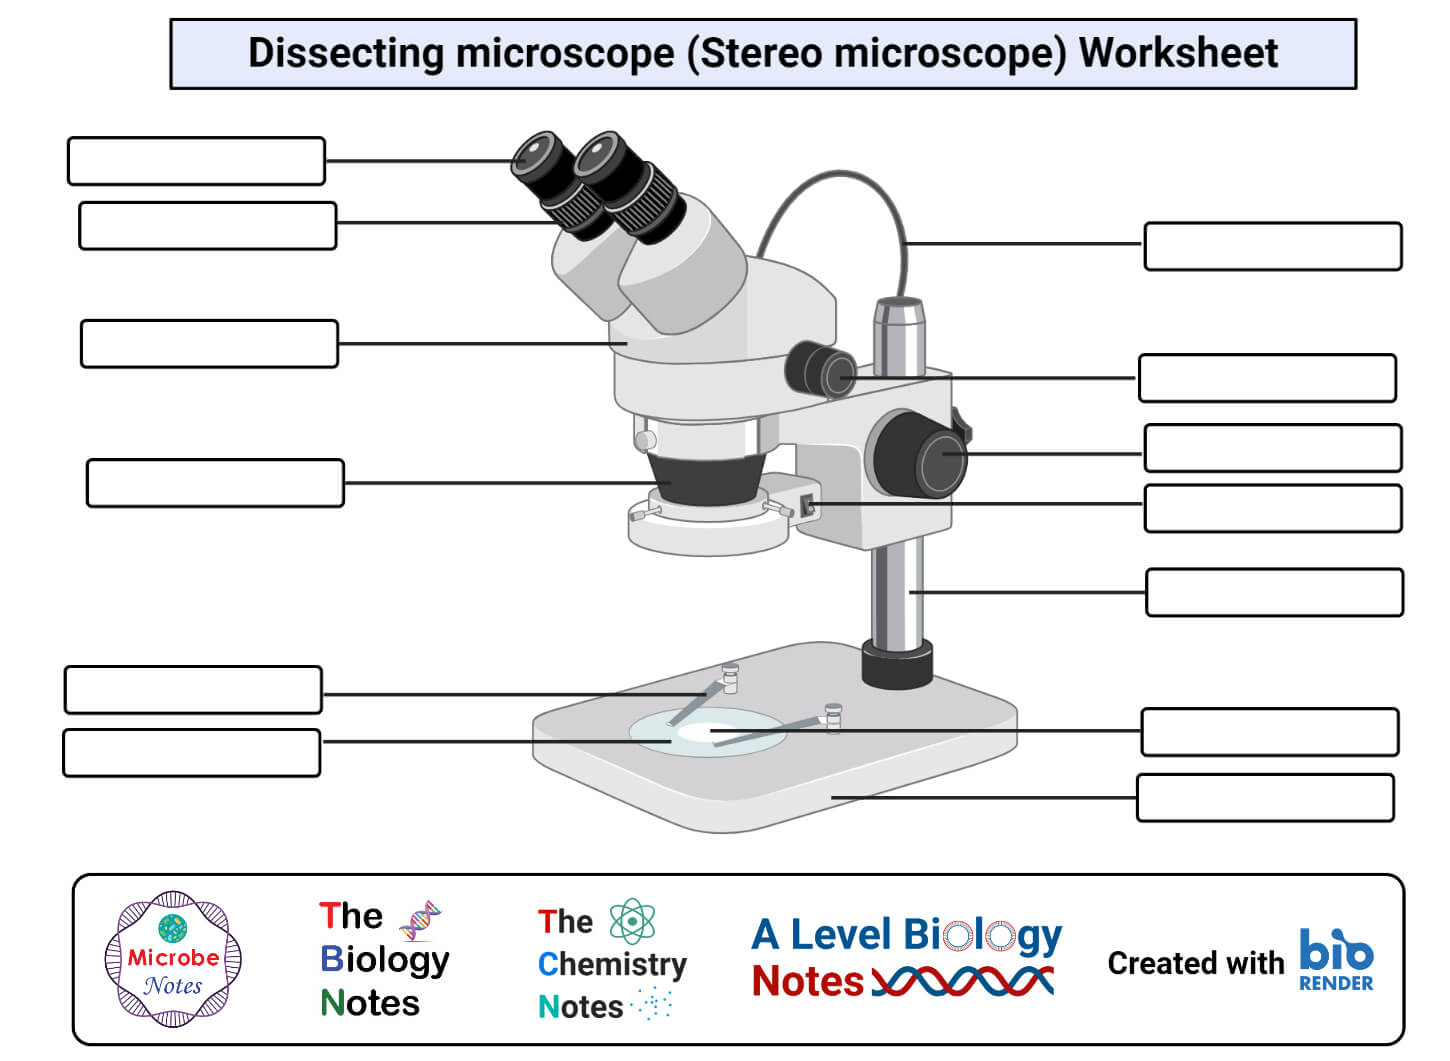 Dissecting microscope (Stereo microscope) Worksheet